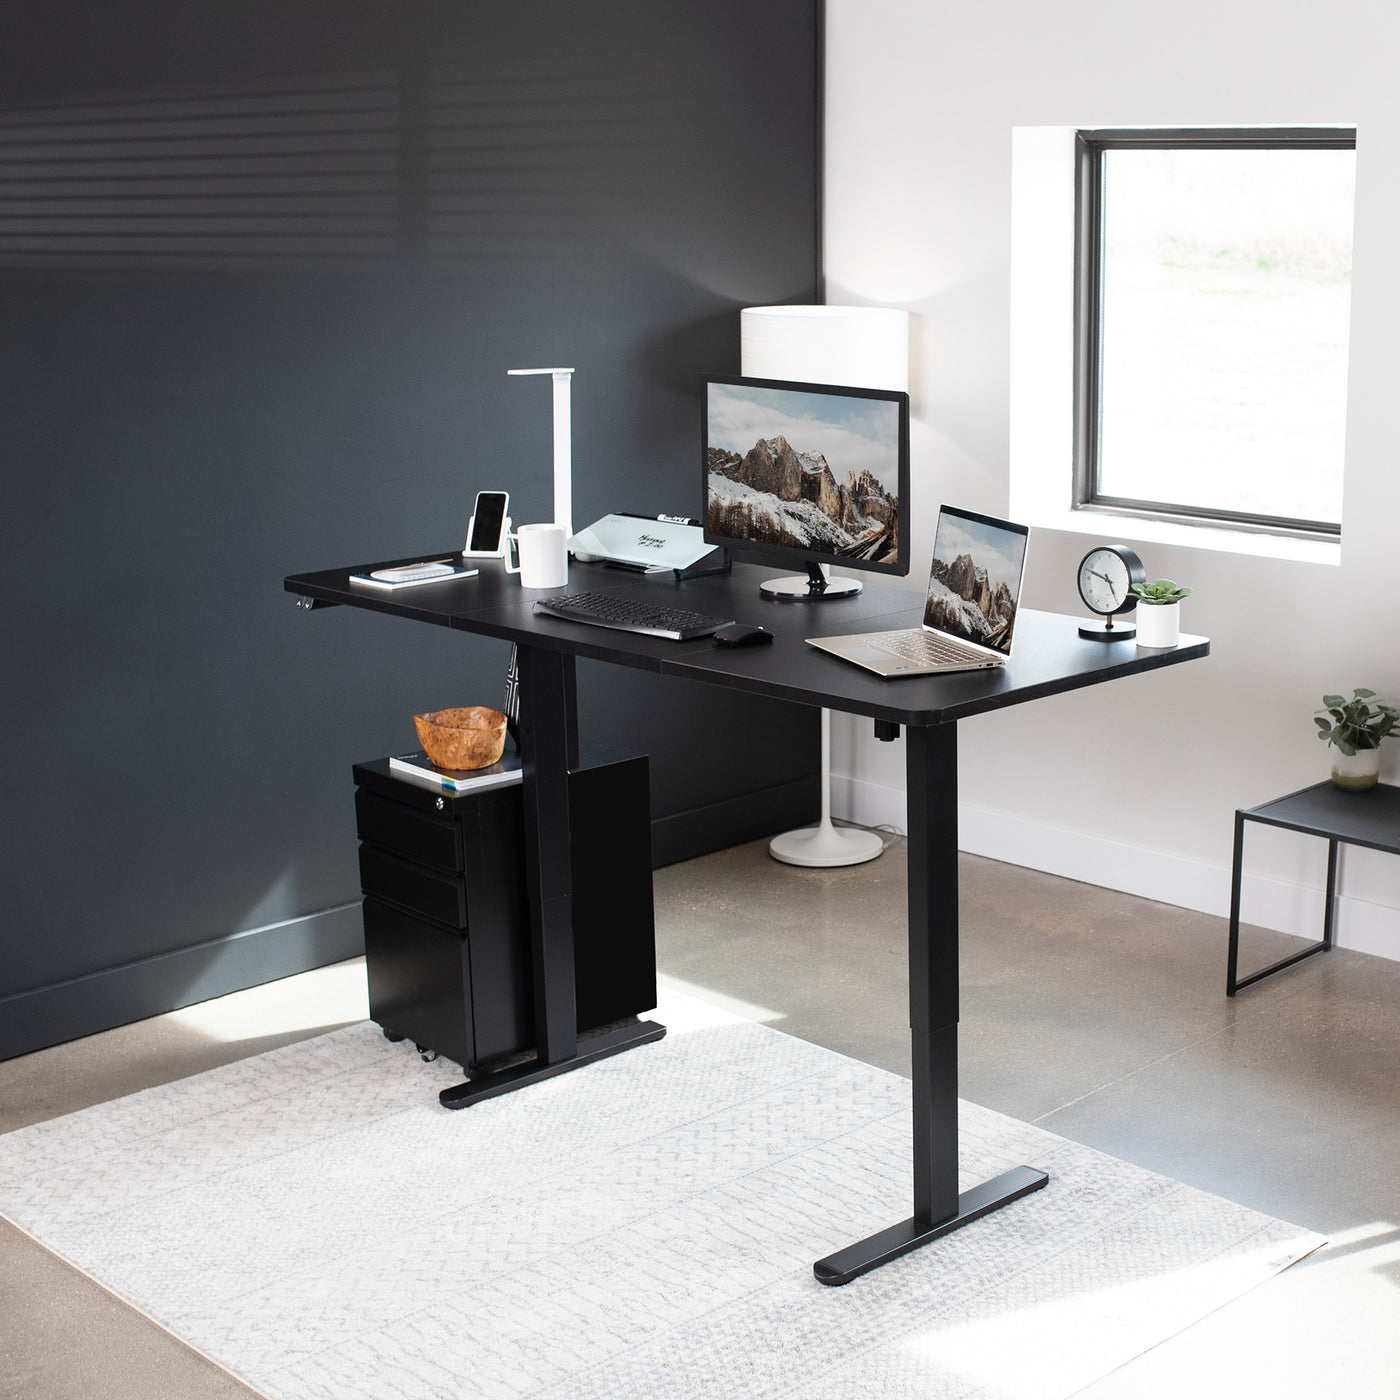 Sturdy ergonomic sit or stand desk frame for active workstation with adjustable height and 2 button controller.